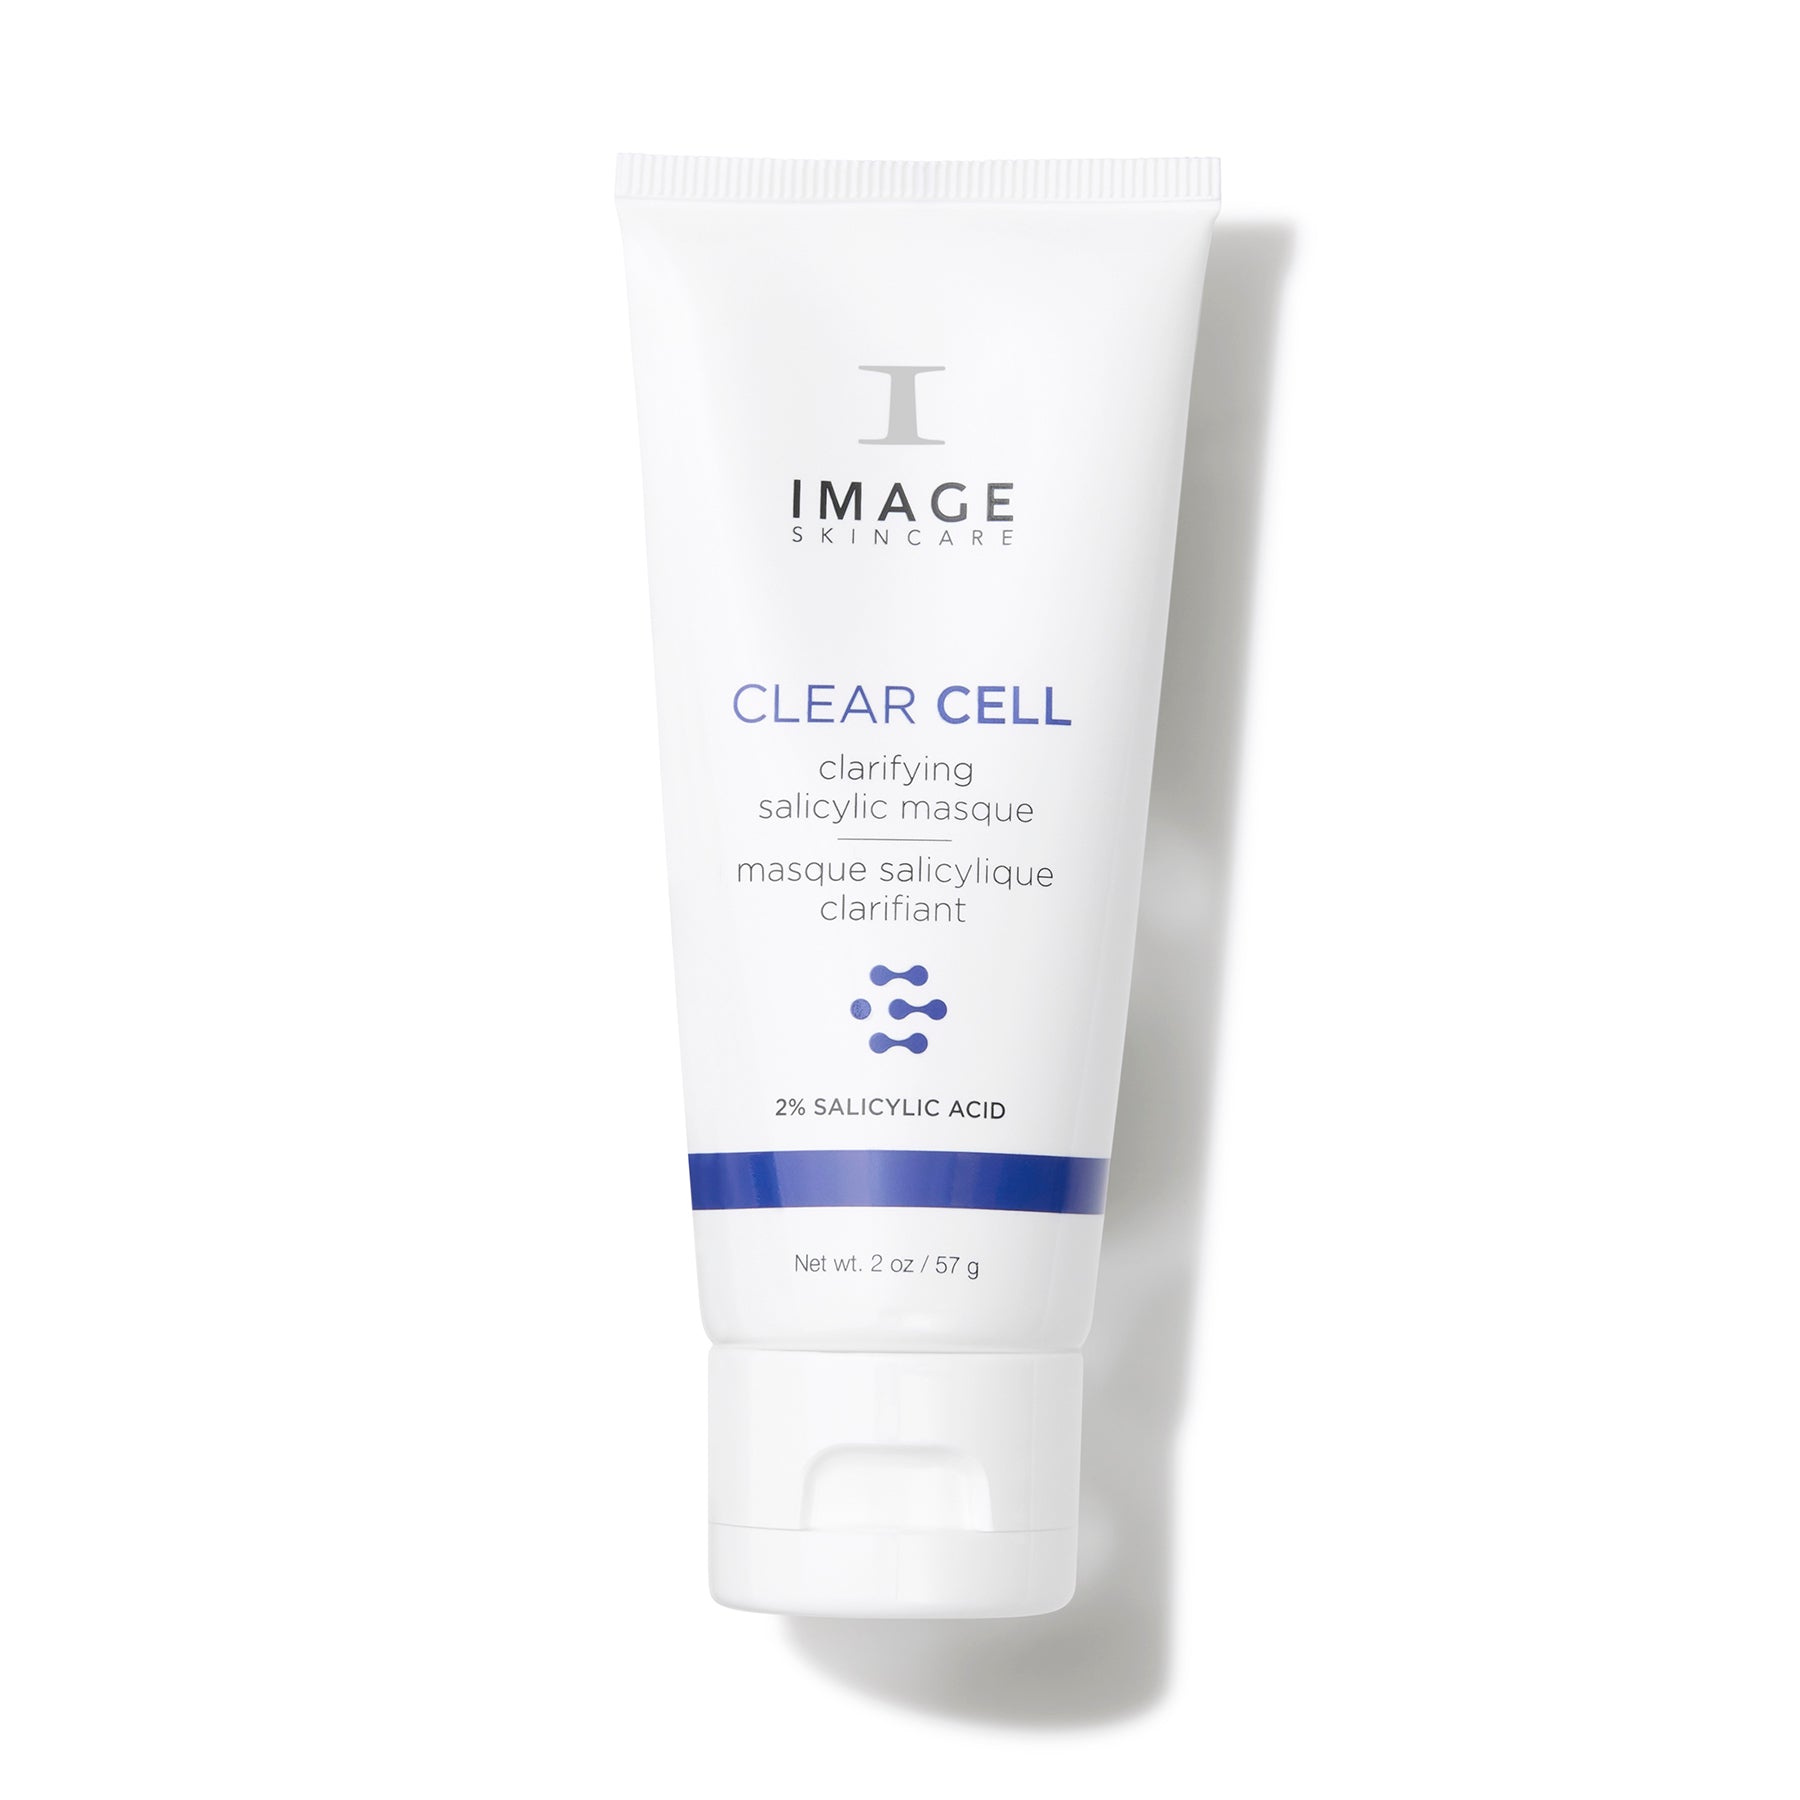 Image Clear Cell Maske